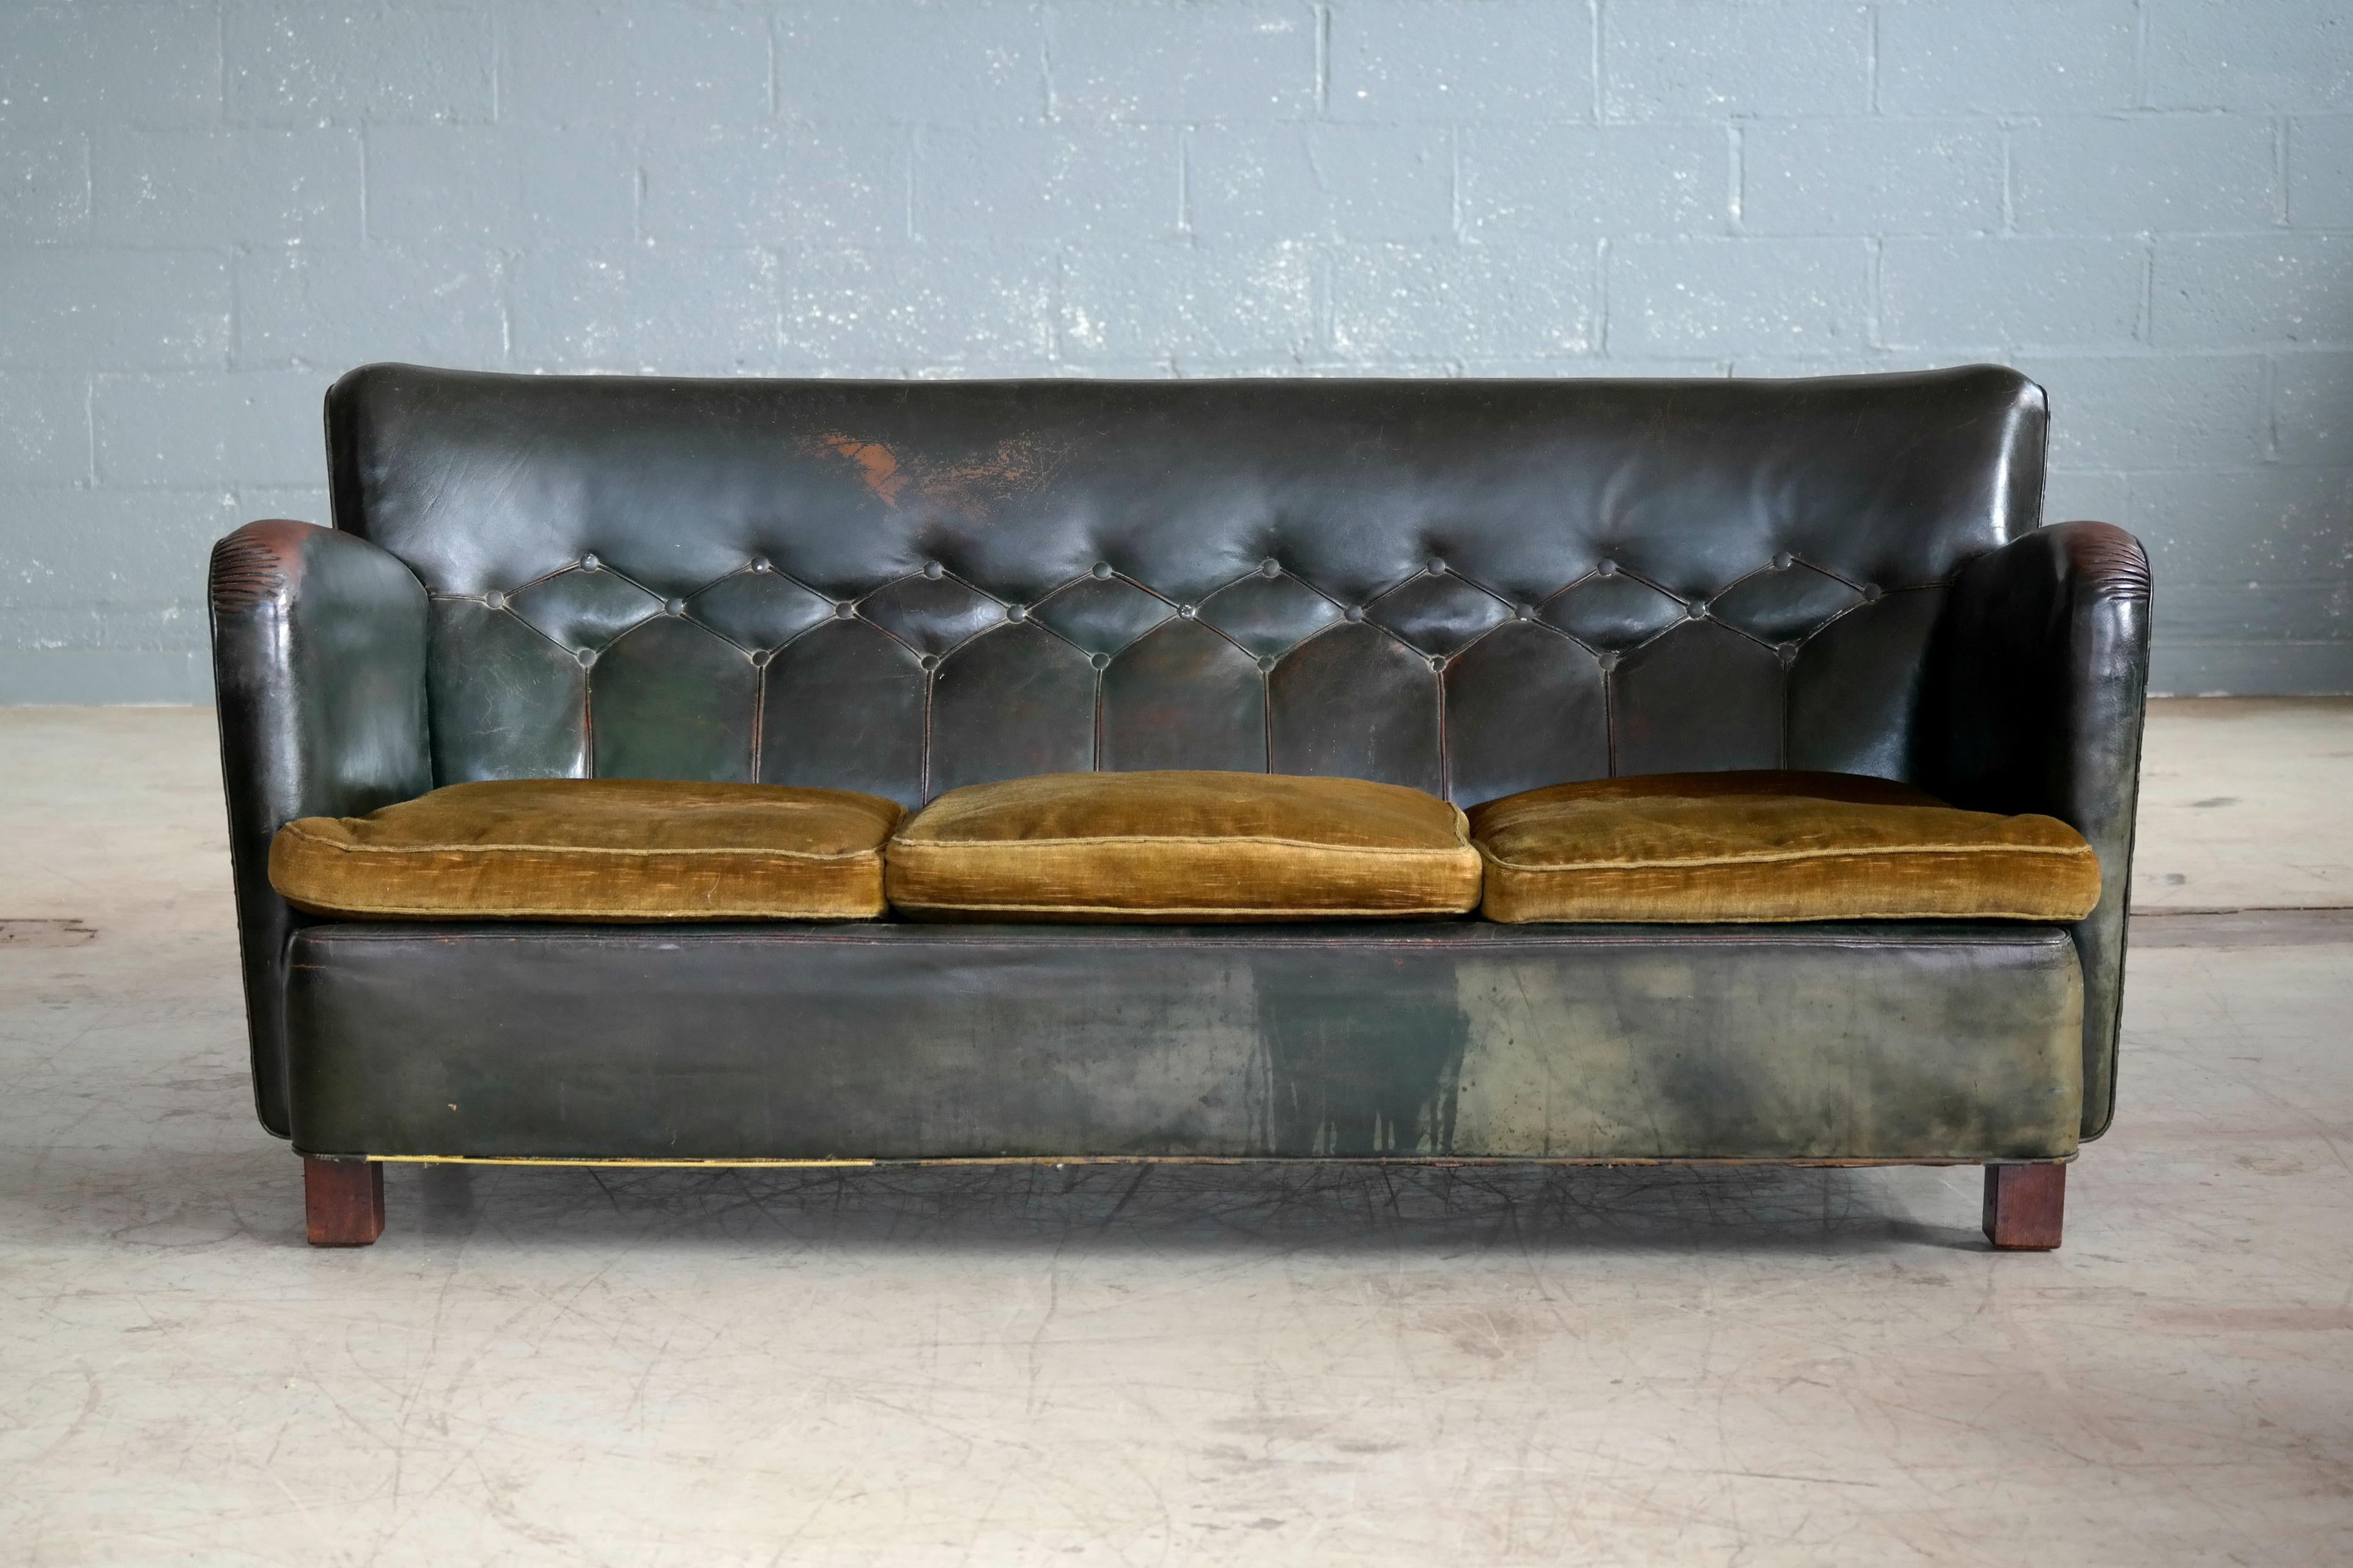 Rare Danish club sofa in green leather with tufted back and seats in a greenish yellow mohair fabric in the style of Flemming Lassen produced in Denmark likely around the mid-1930s. Legs made from solid mahogany. Comfortable and super solid in